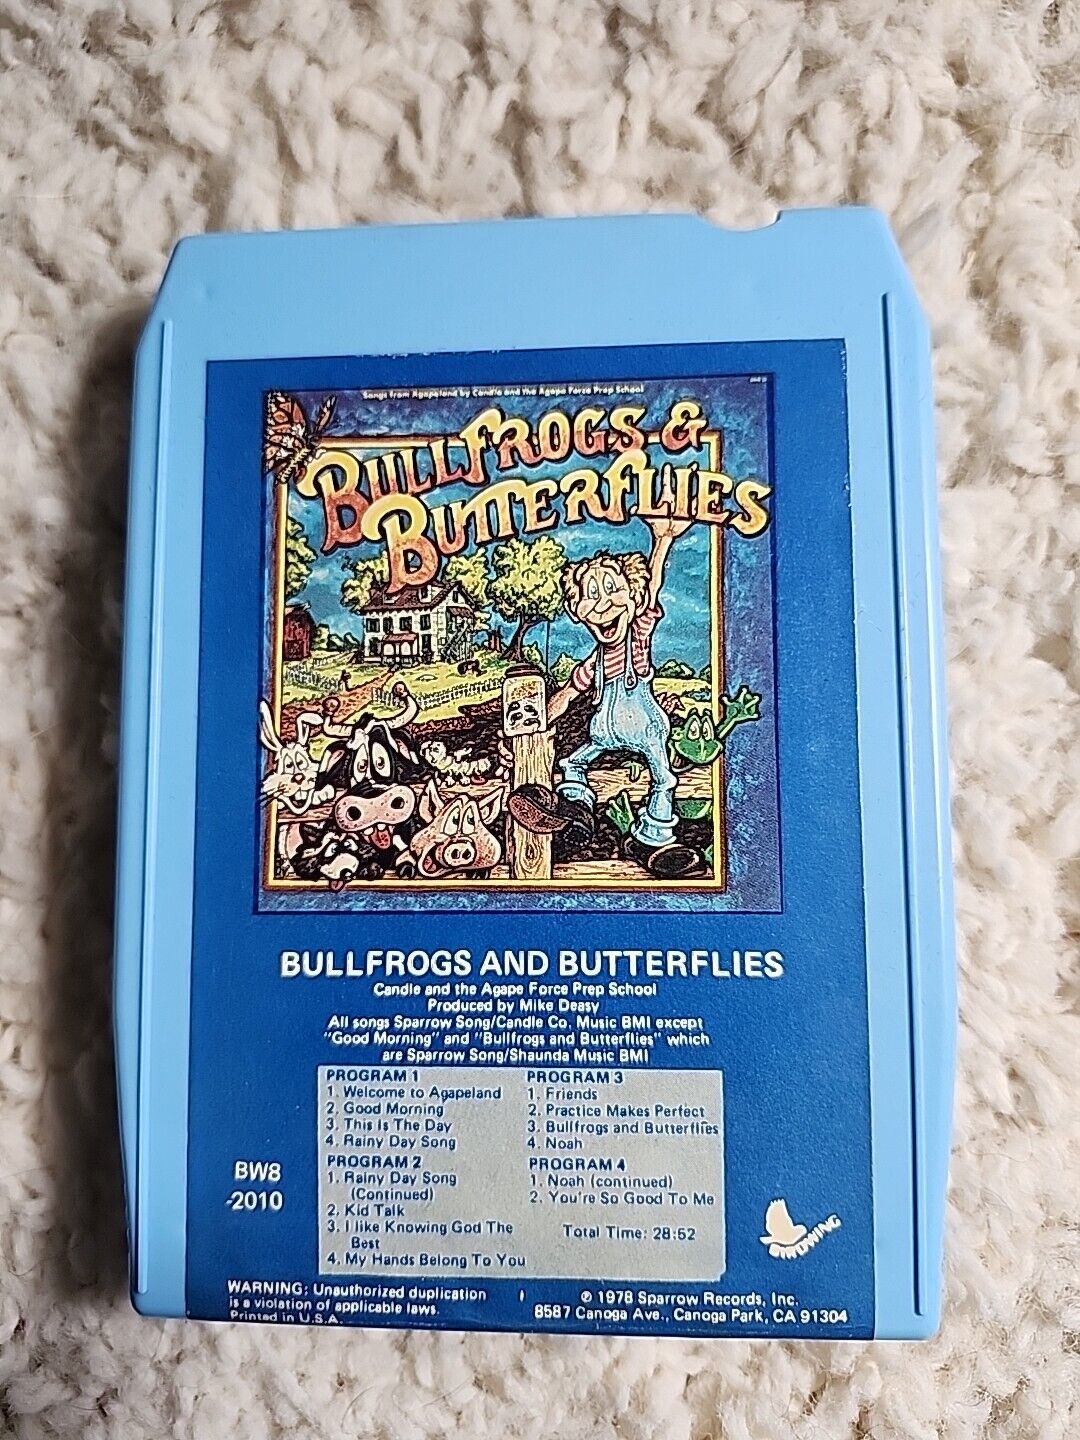 Bullfrogs and Butterflies 8 track Lyrics Sheet Candle and the Agape force prep